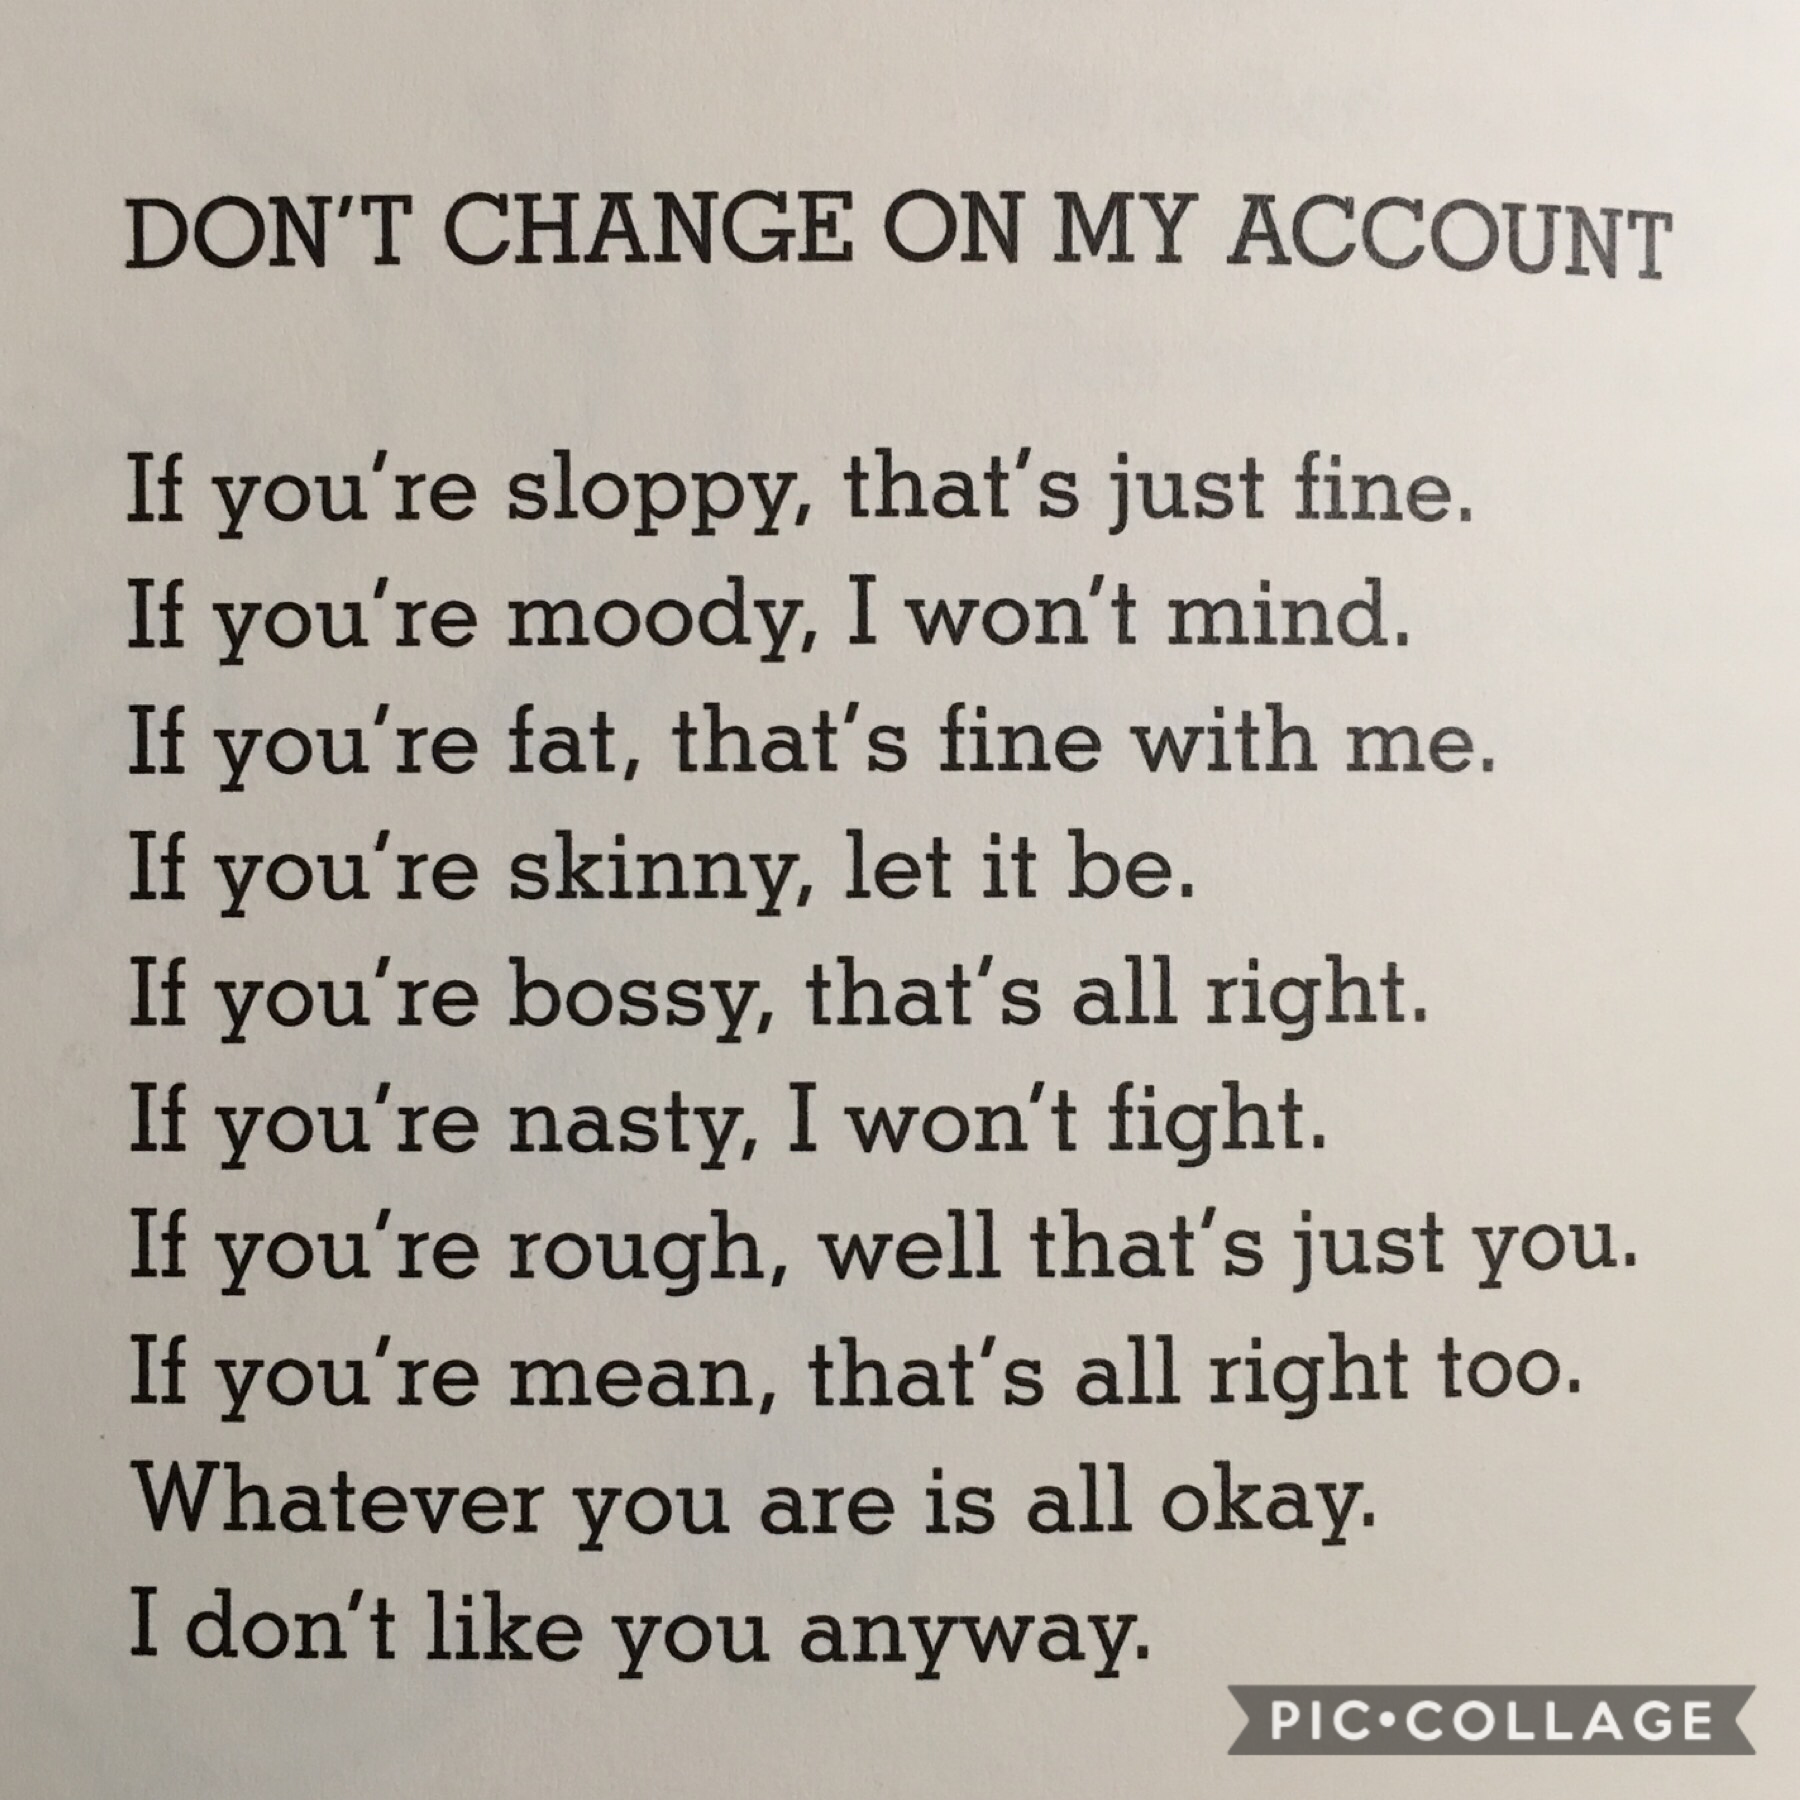 A very relatable poem...